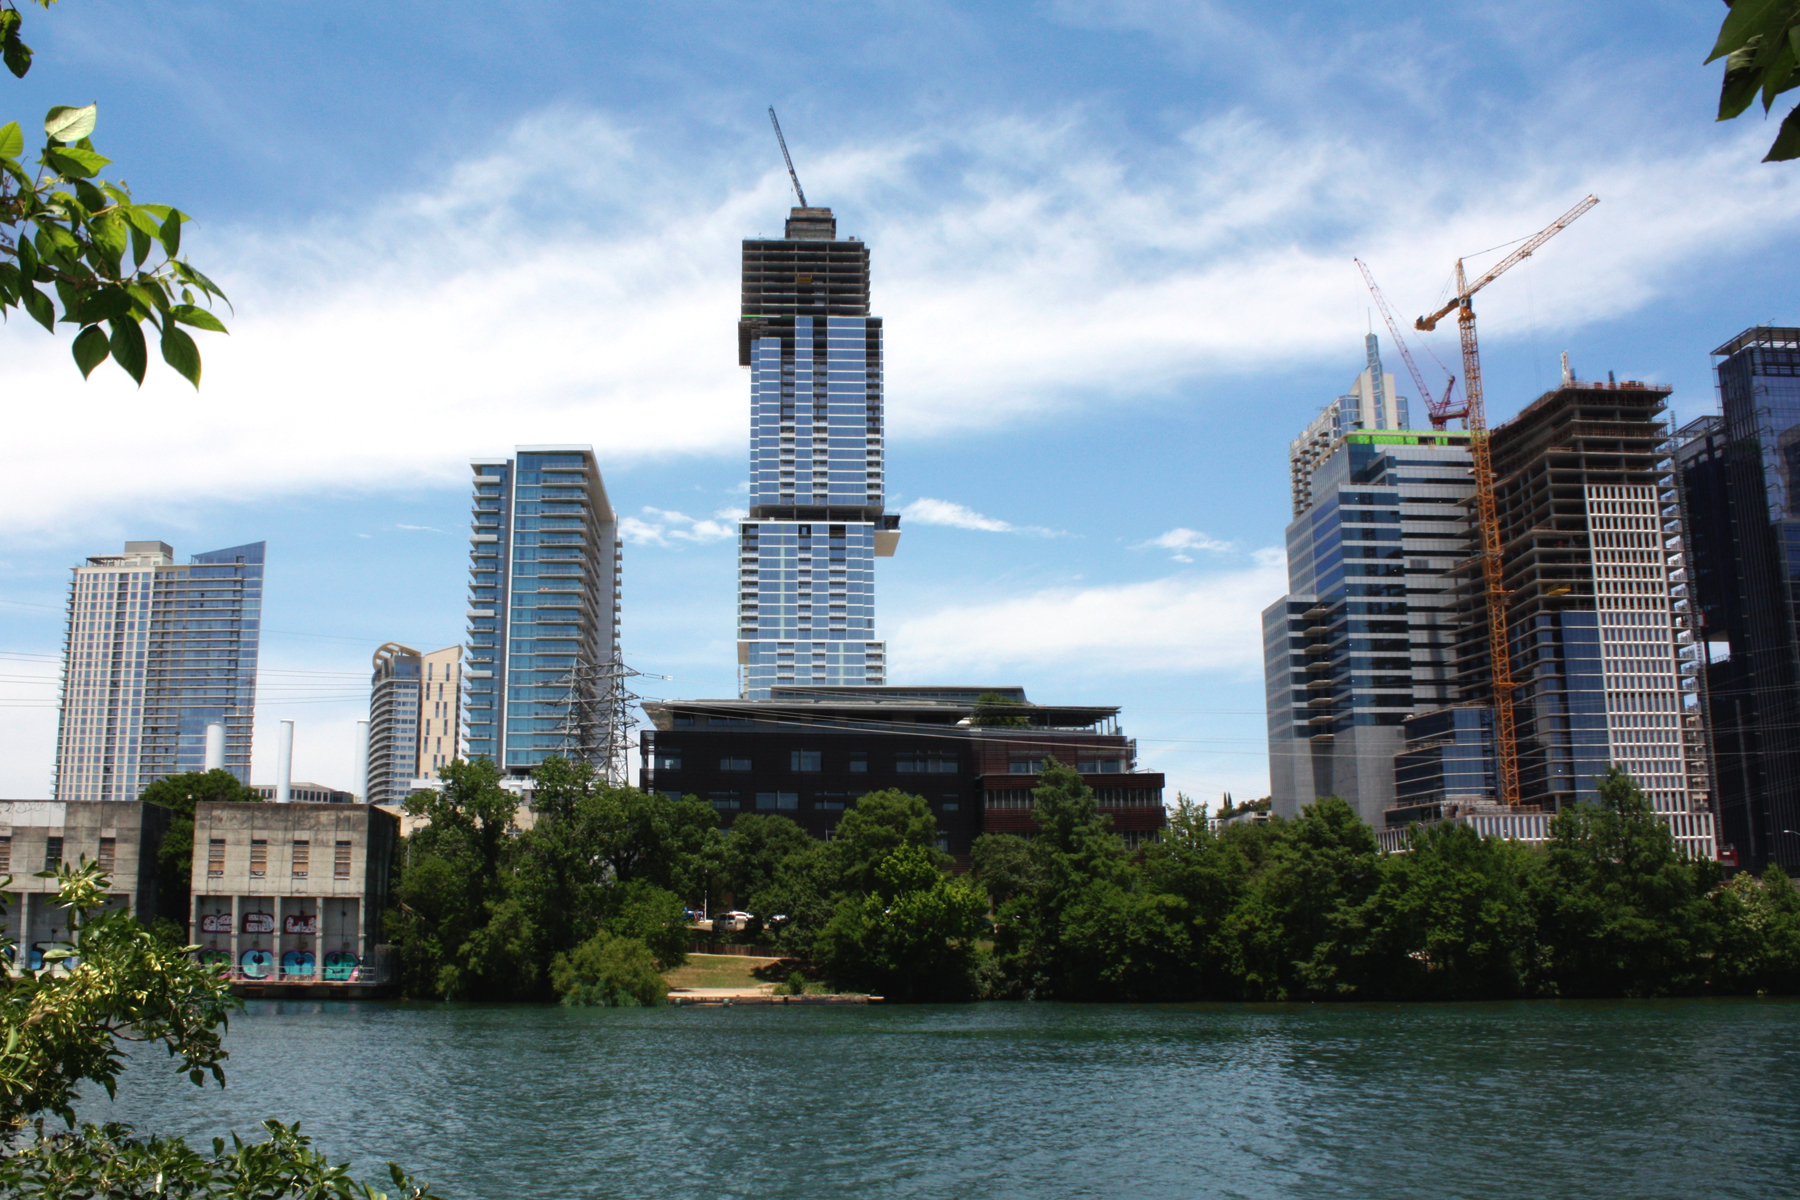 Medium shot of a skyline with tallest building, still under construction, standing out